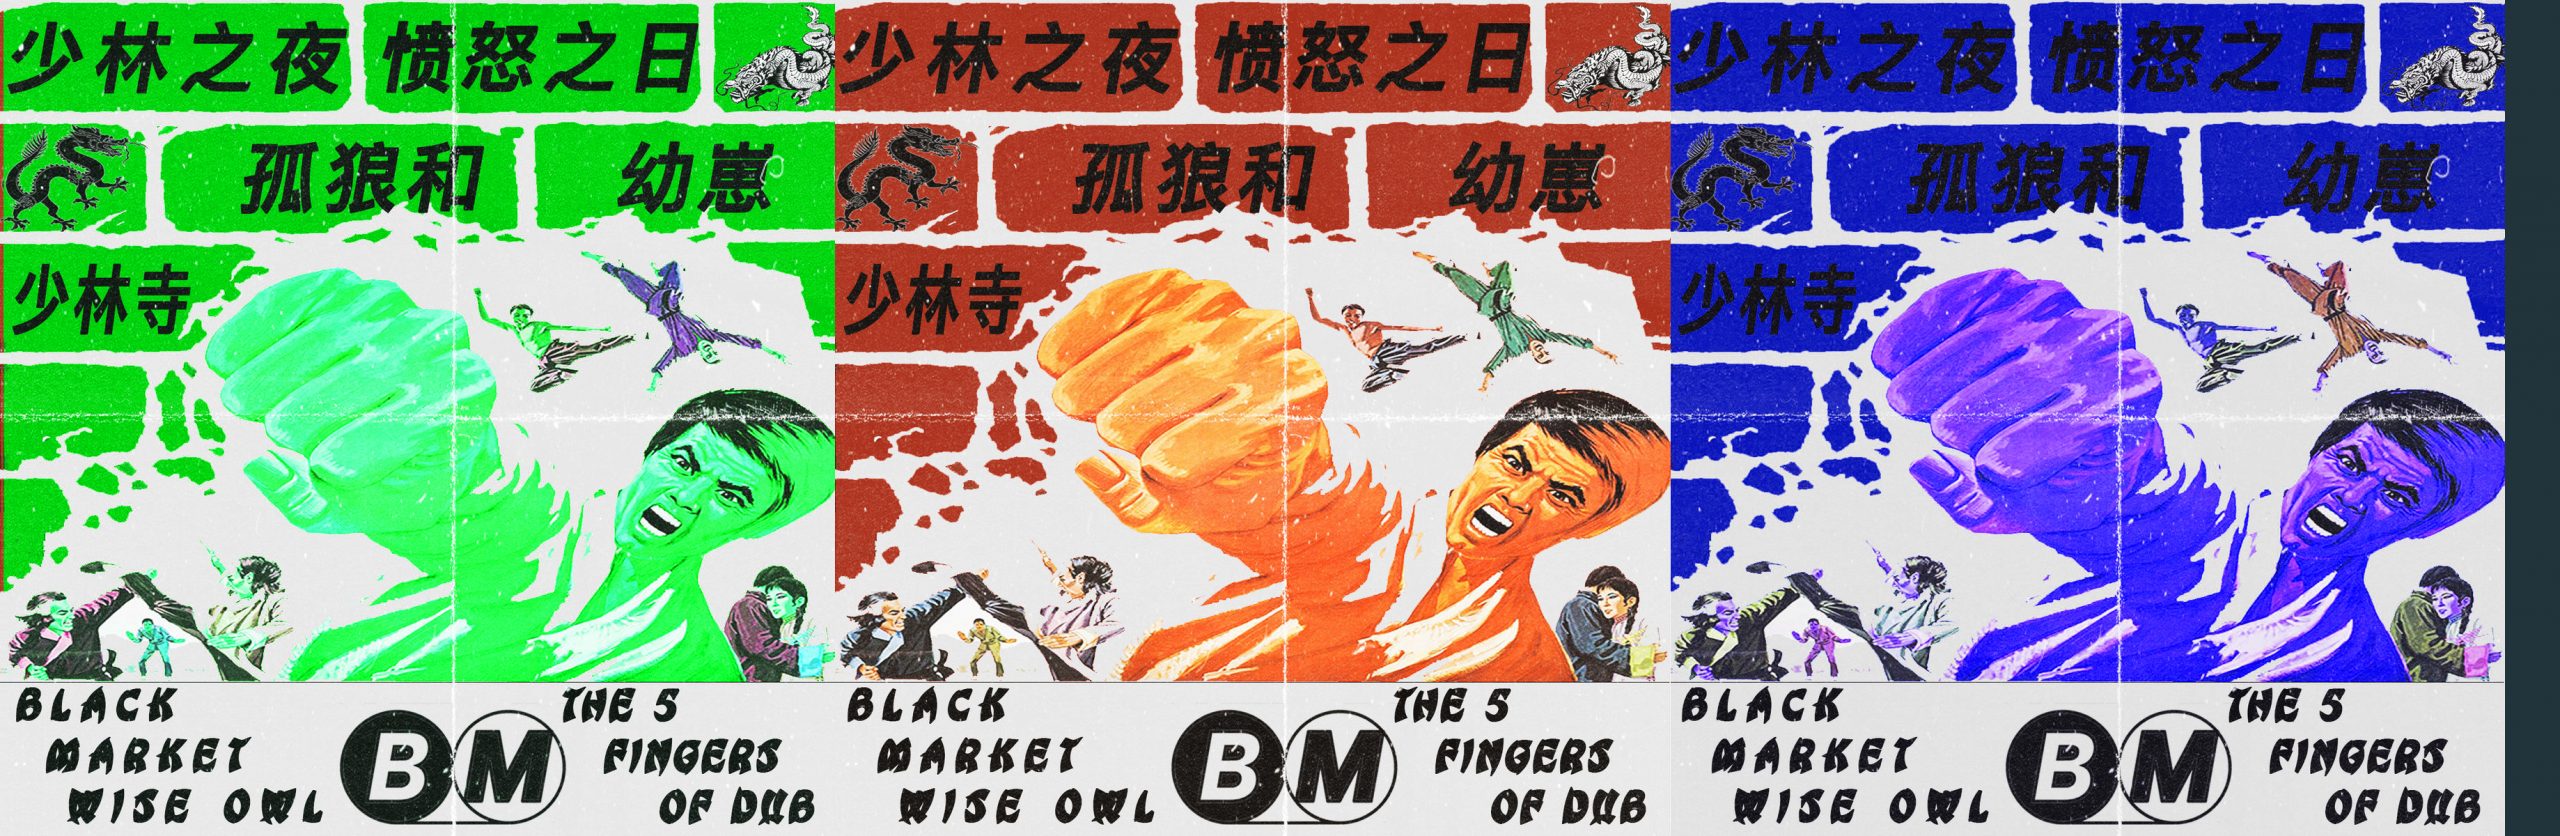 Black Market Dub with "Five Fingers Of Dub," featuring remixes of music from Bruce Lee films